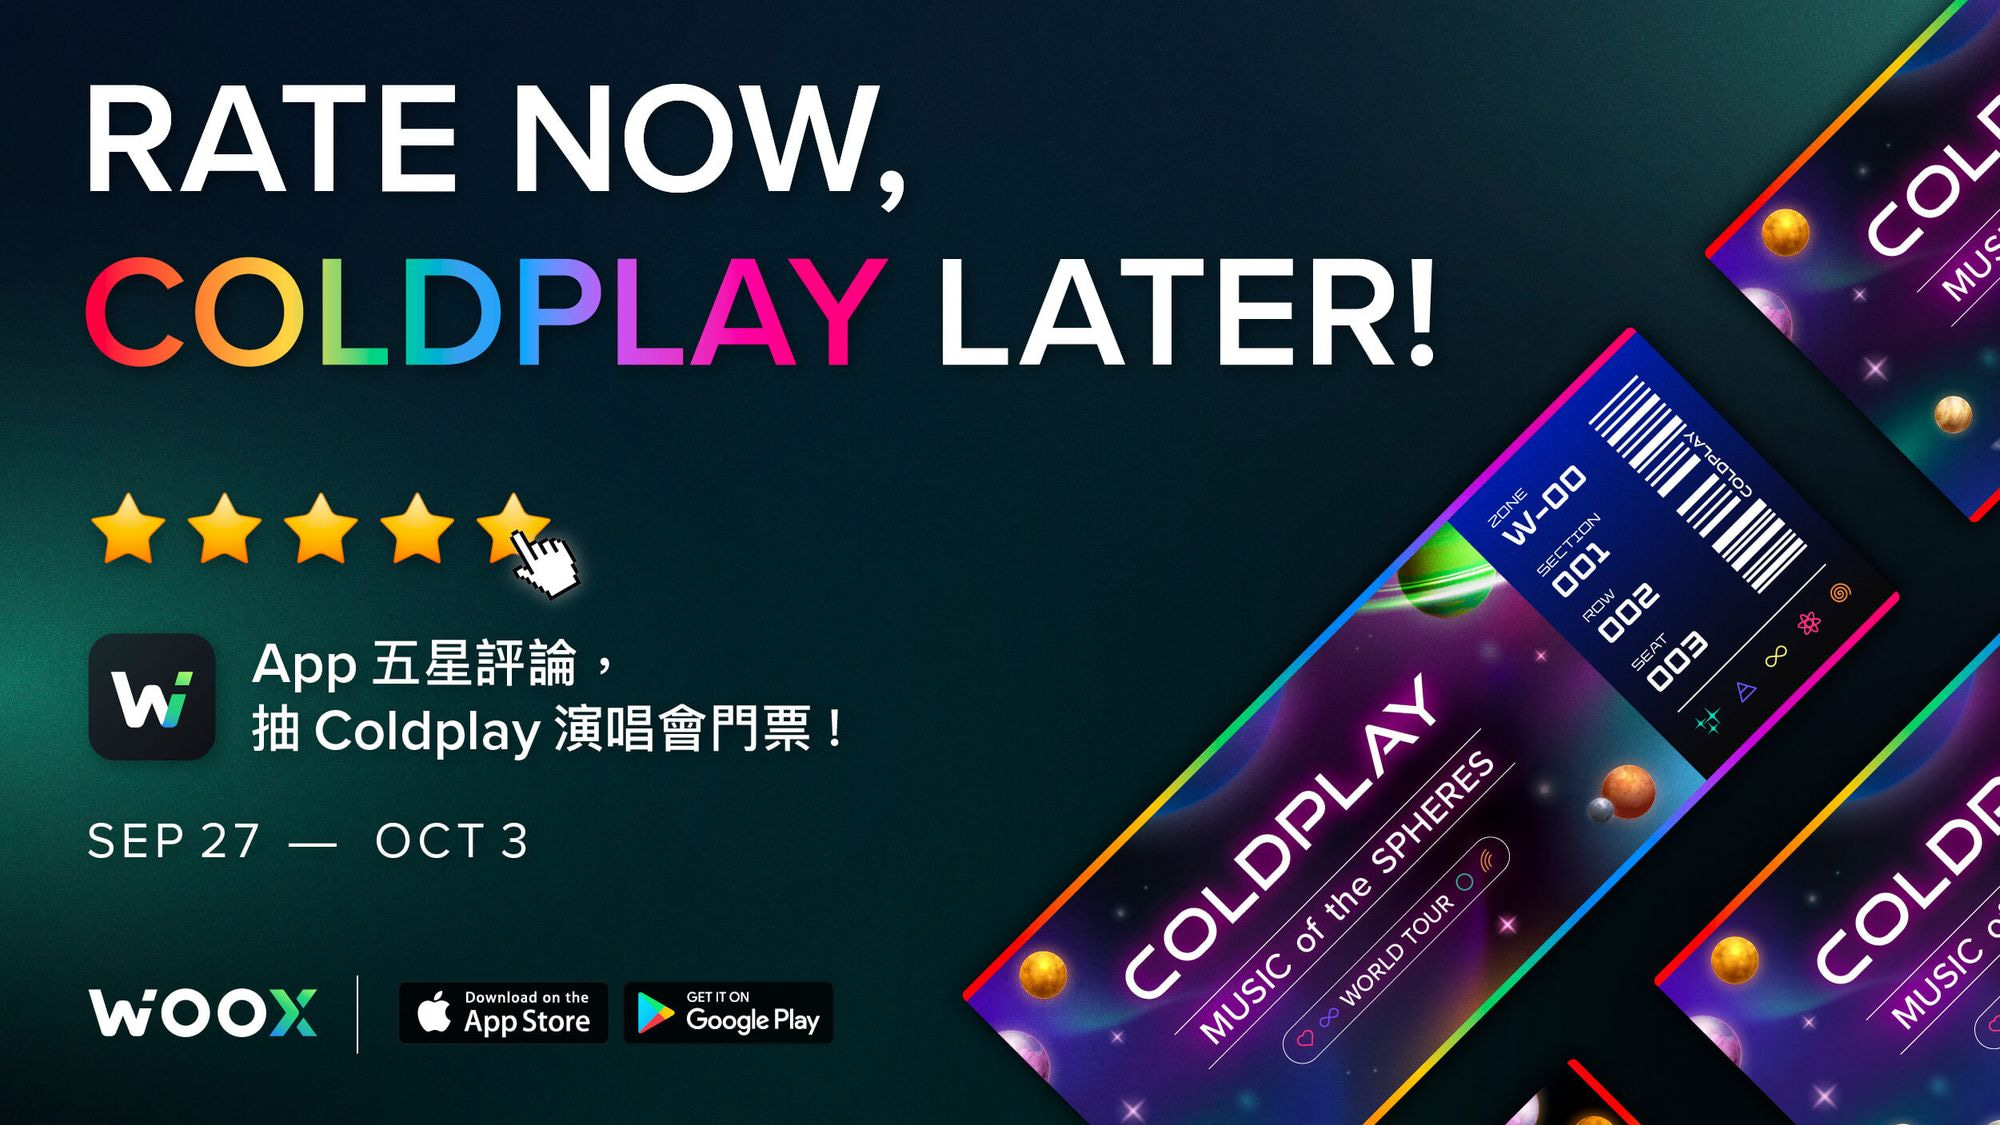 Rate Now, Coldplay Later! 活動公告